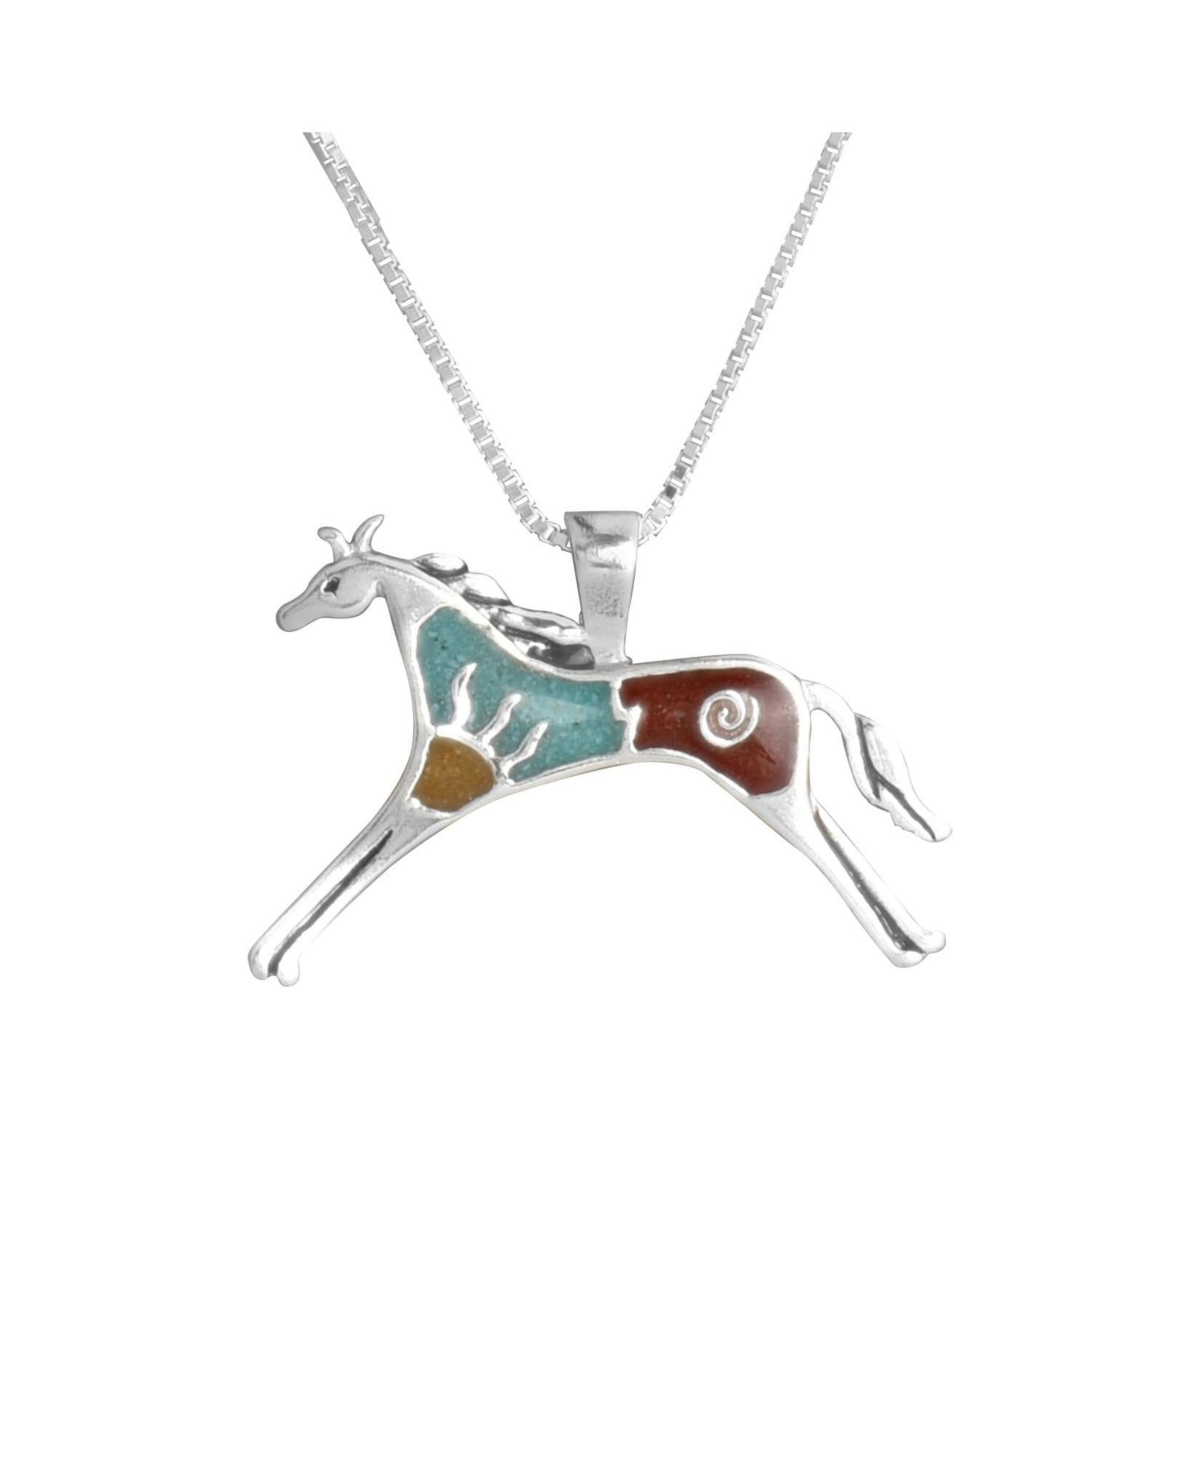 Sterling Silver and Multi-Gemstone Inlay Horse Pendant Necklace, 18 Inches - Turquoise/jasper